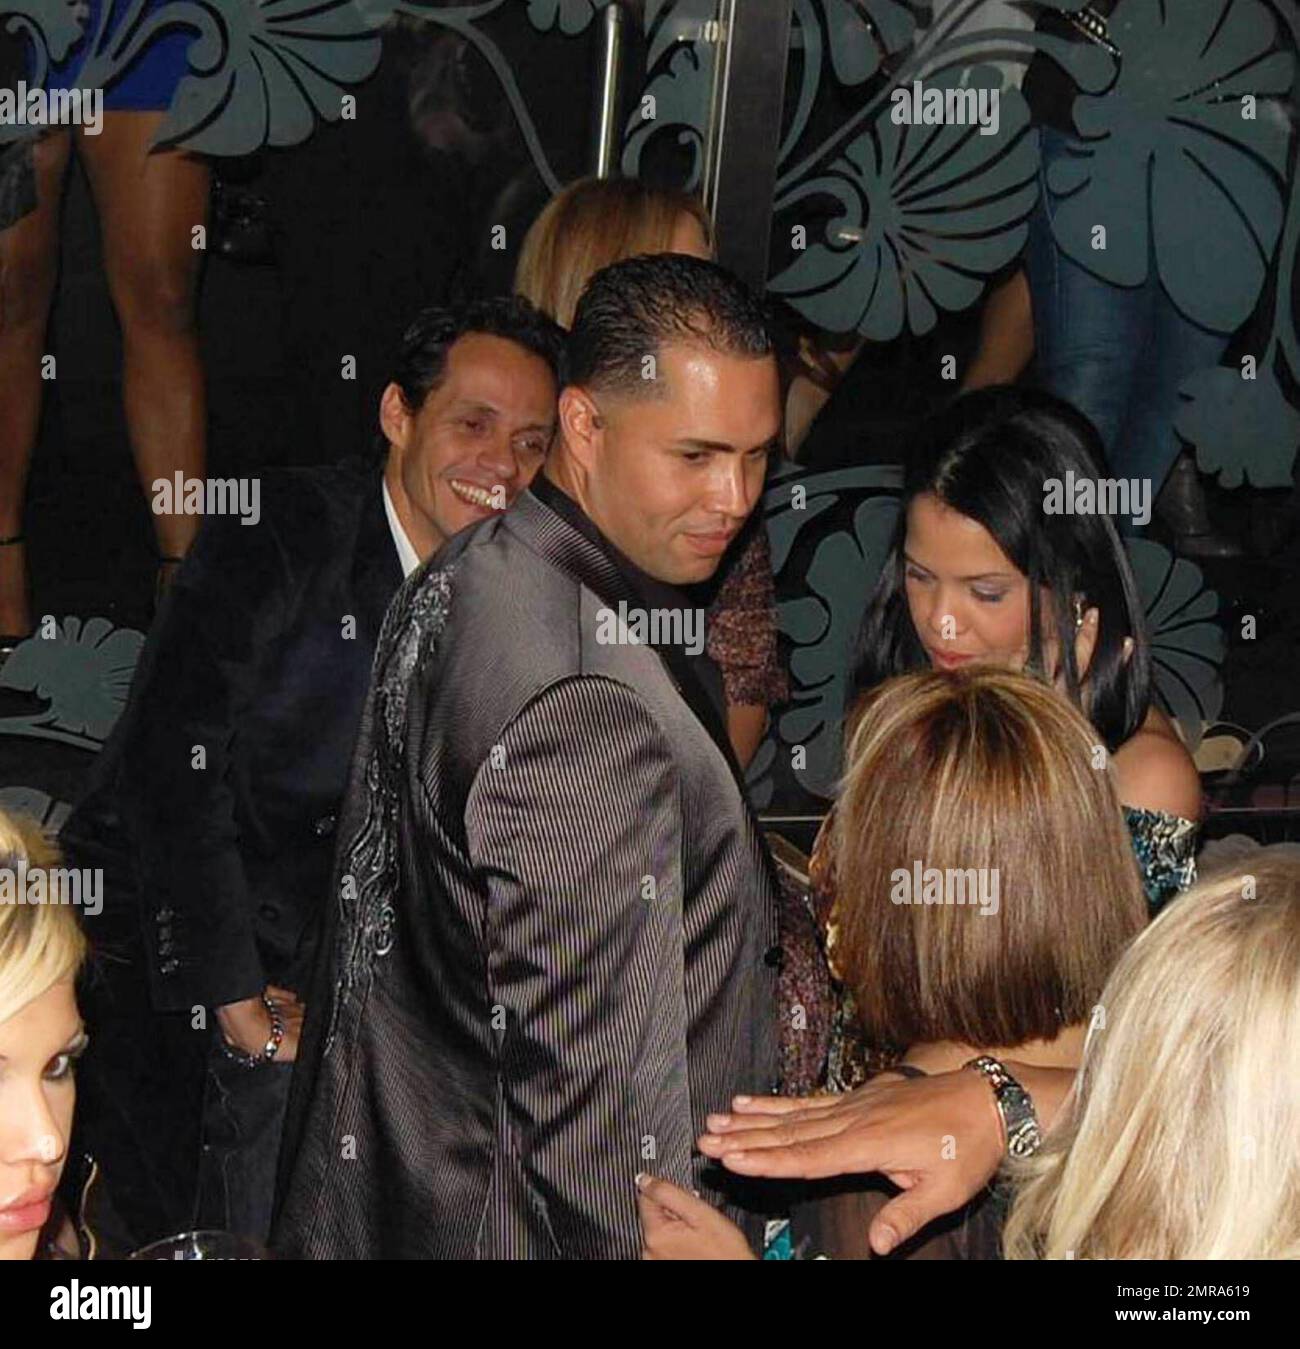 Exclusive!! Jennifer Lopez and Marc Anthony look the picture of love at Bank nightclub in Las Vegas.  The couple were surrounded by security as they chilled in the VIP area of the club.  Las Vegas, NV 10/10/08 Stock Photo